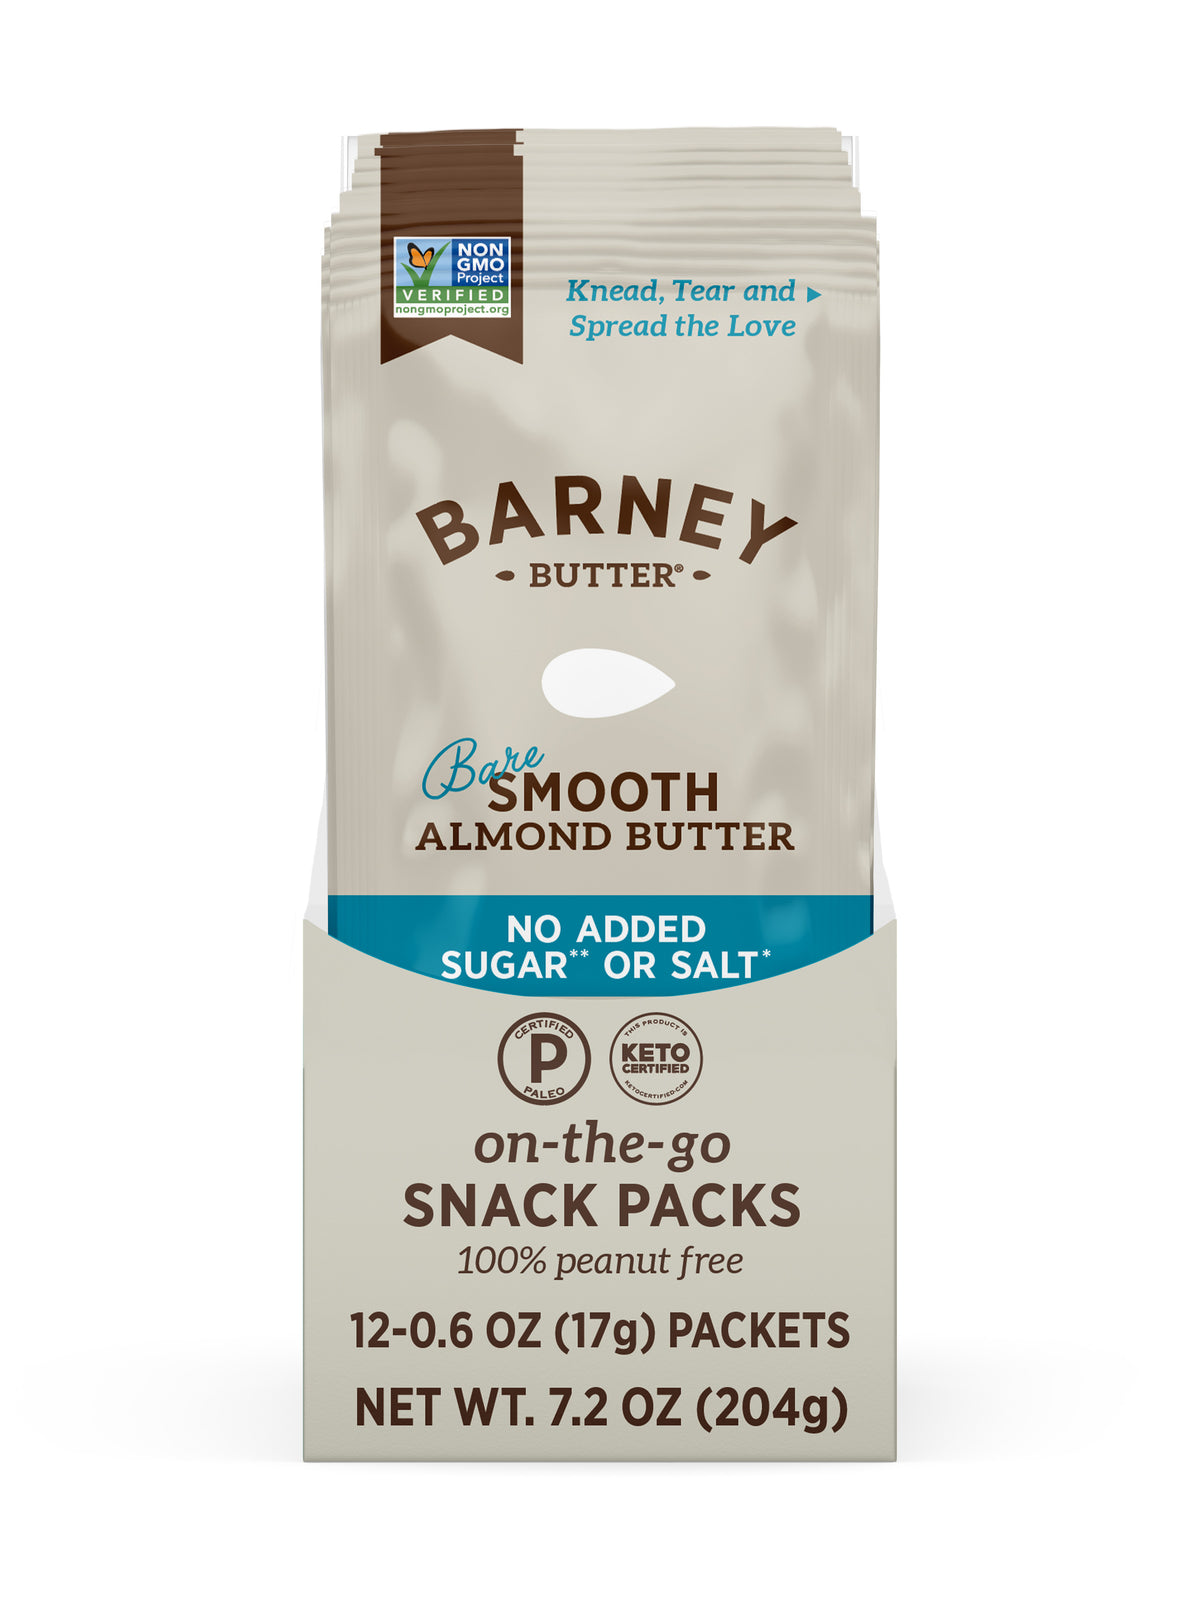 Bare Smooth Almond Butter Snack Pack